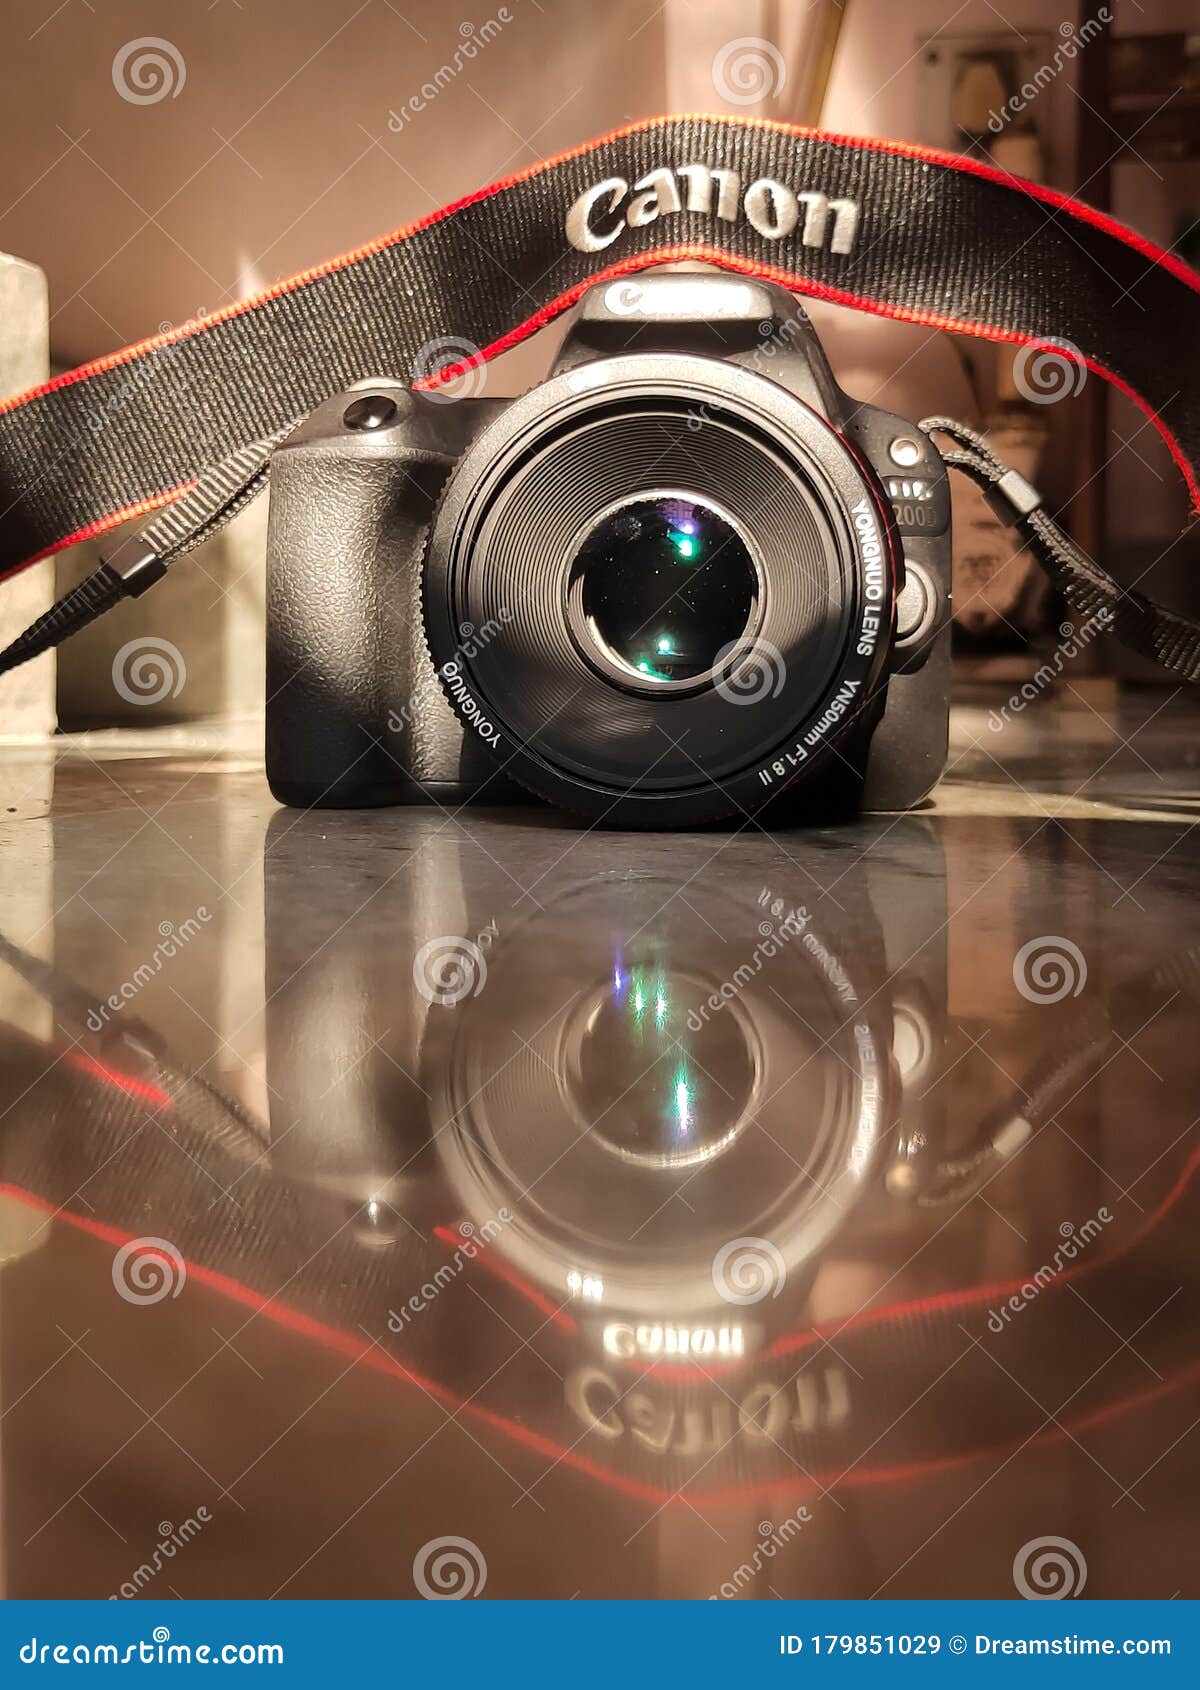 Canon 200D Set with YONGNUO 50 Mm F 1..8 Large Aperture Auto Focus. Editorial Stock Image - Image of accessories, ball: 179851029